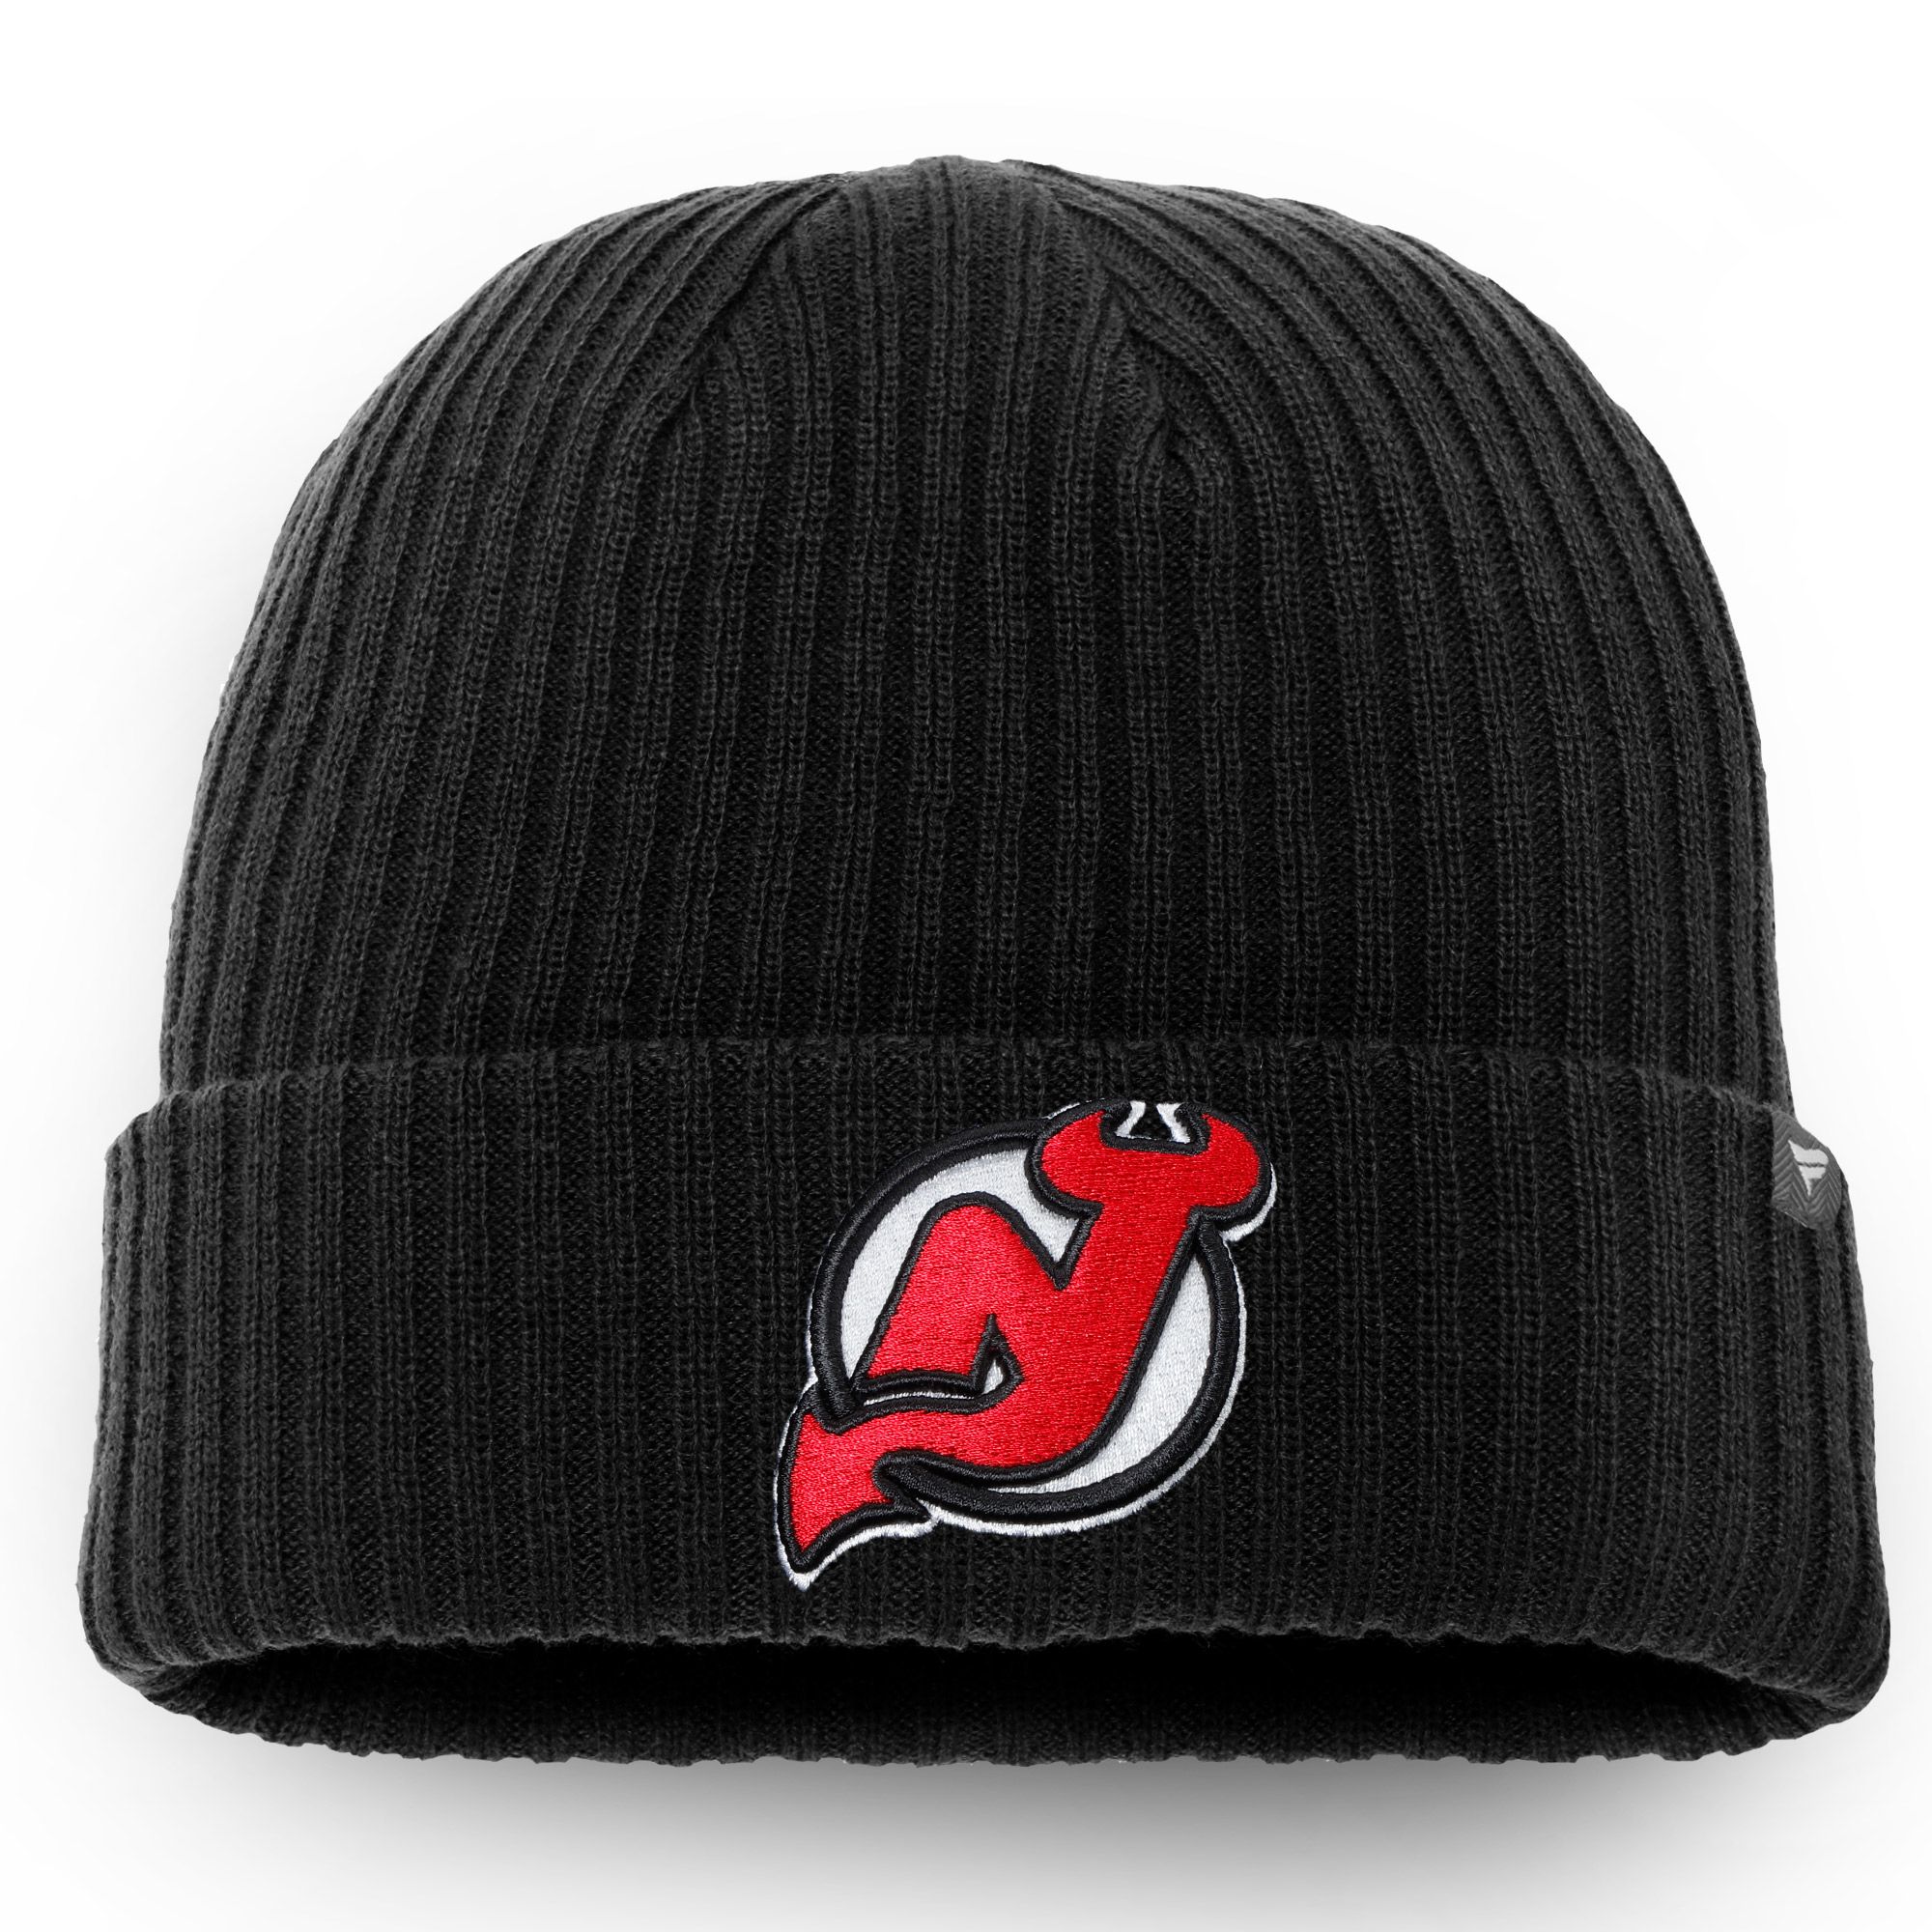 New Jersey Devils Men's Apparel  Curbside Pickup Available at DICK'S